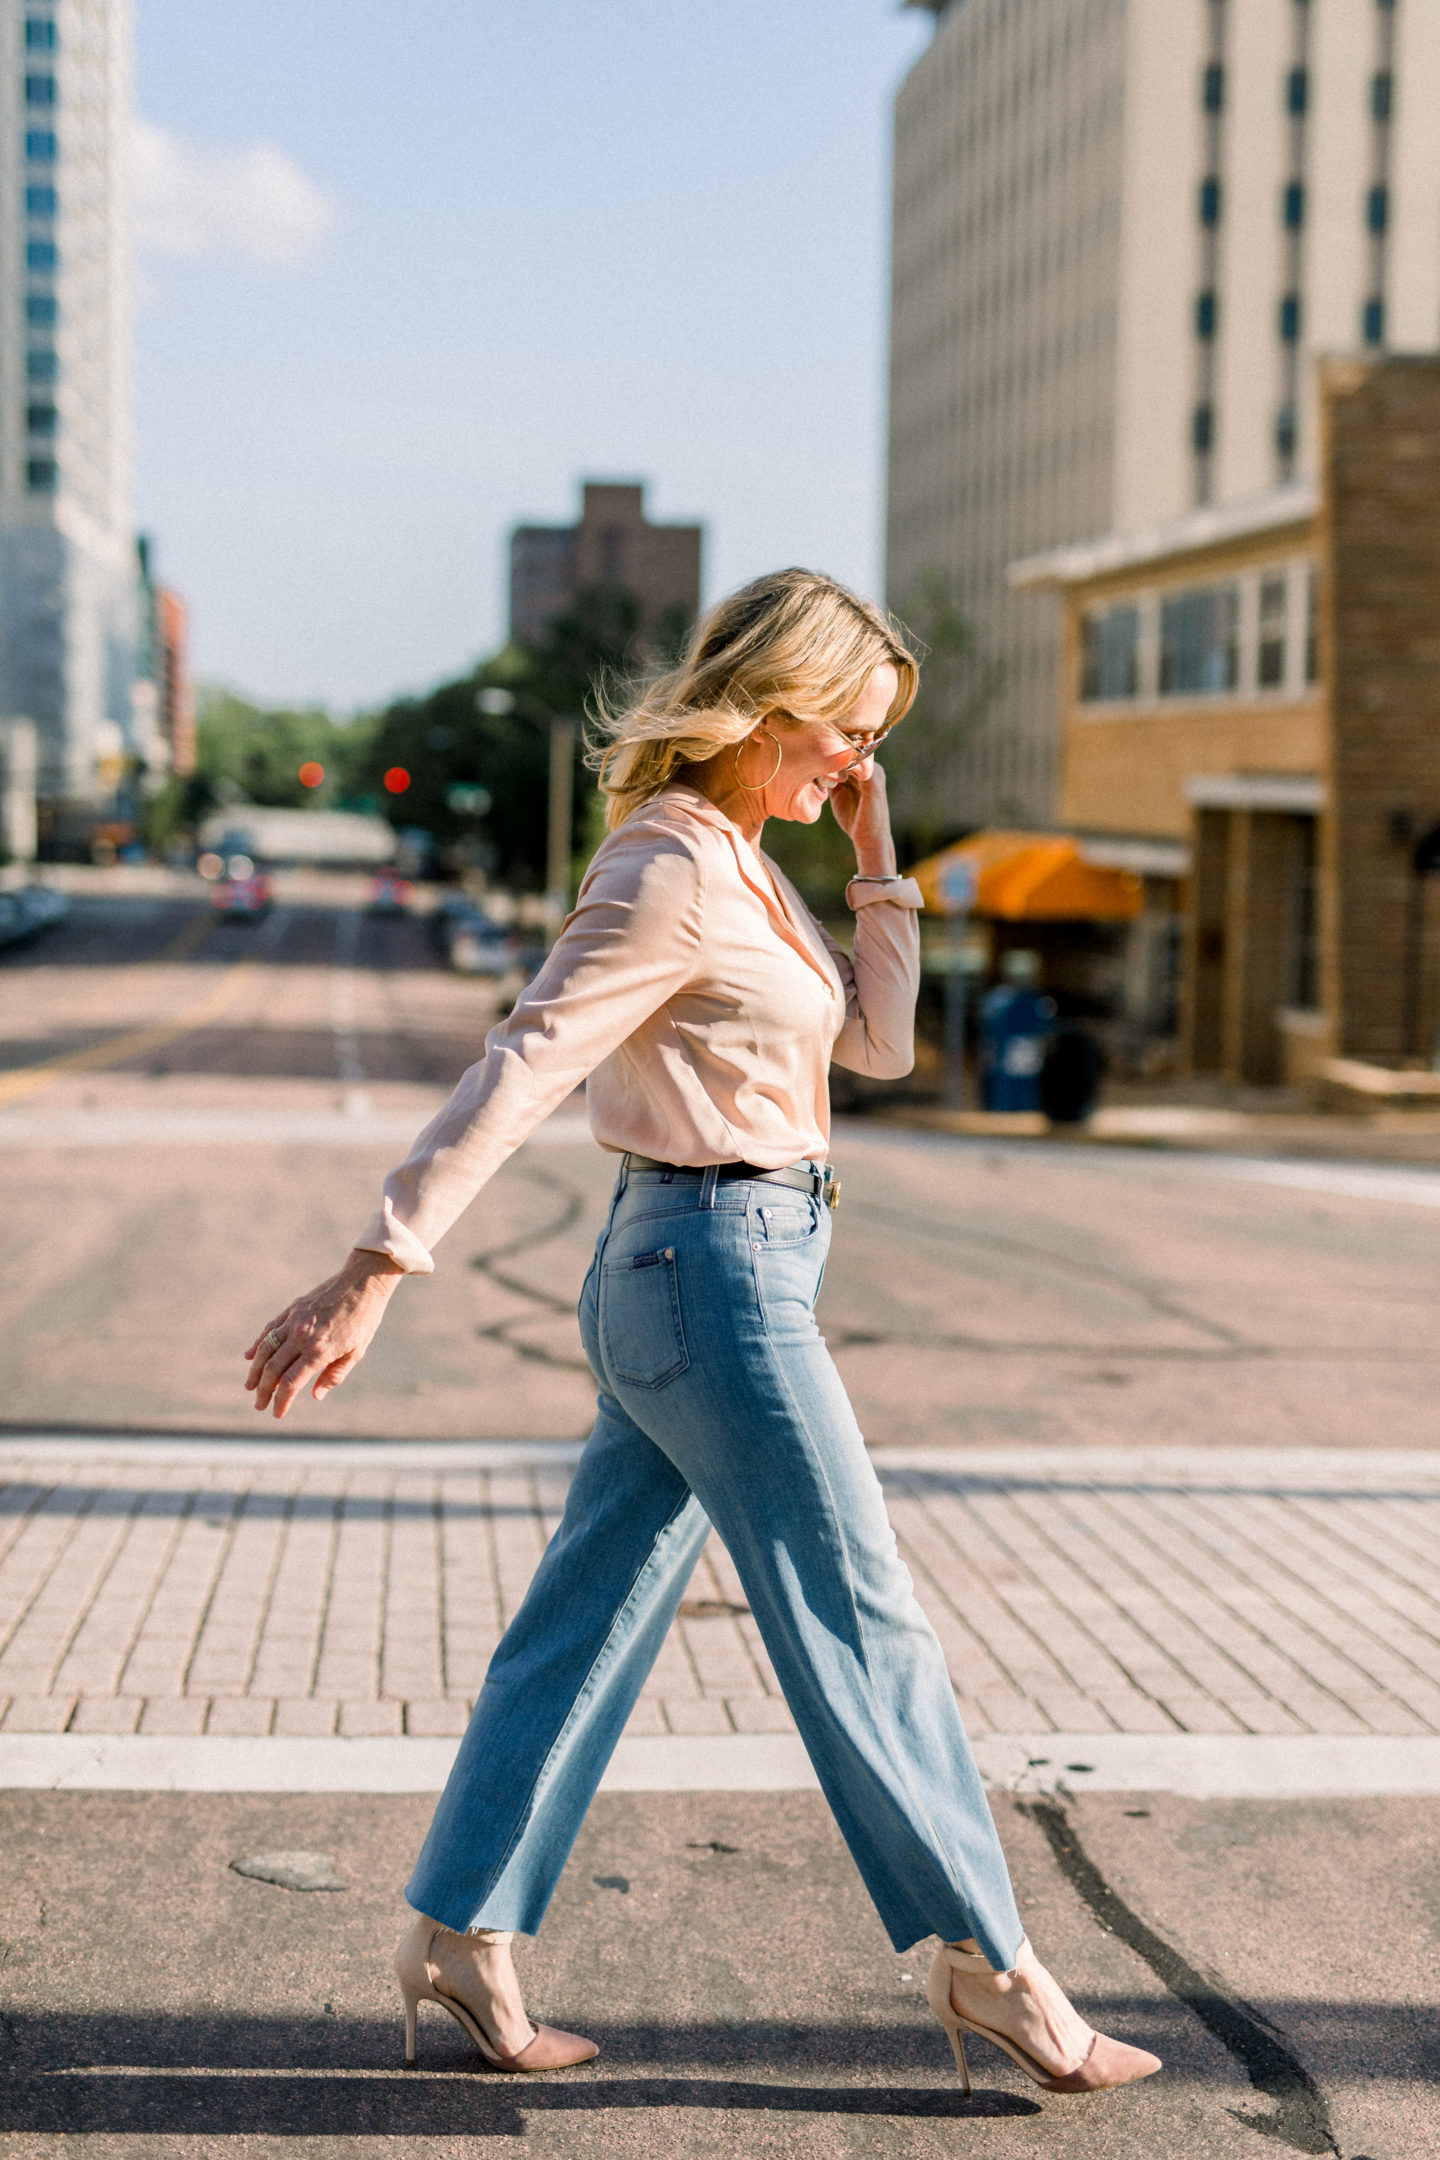 2019 Nordstrom Anniversary Sale: What We Purchased | nordstrom anniversary sale 2019 | nordstrom anniversary sale | wide leg pants outfit | wide leg jeans outfit | wide leg jeans outfit summer | wide leg jeans outfit spring | pajama top outfit | pajama top street style | pajama top outfit street style | Oh Darling Blog